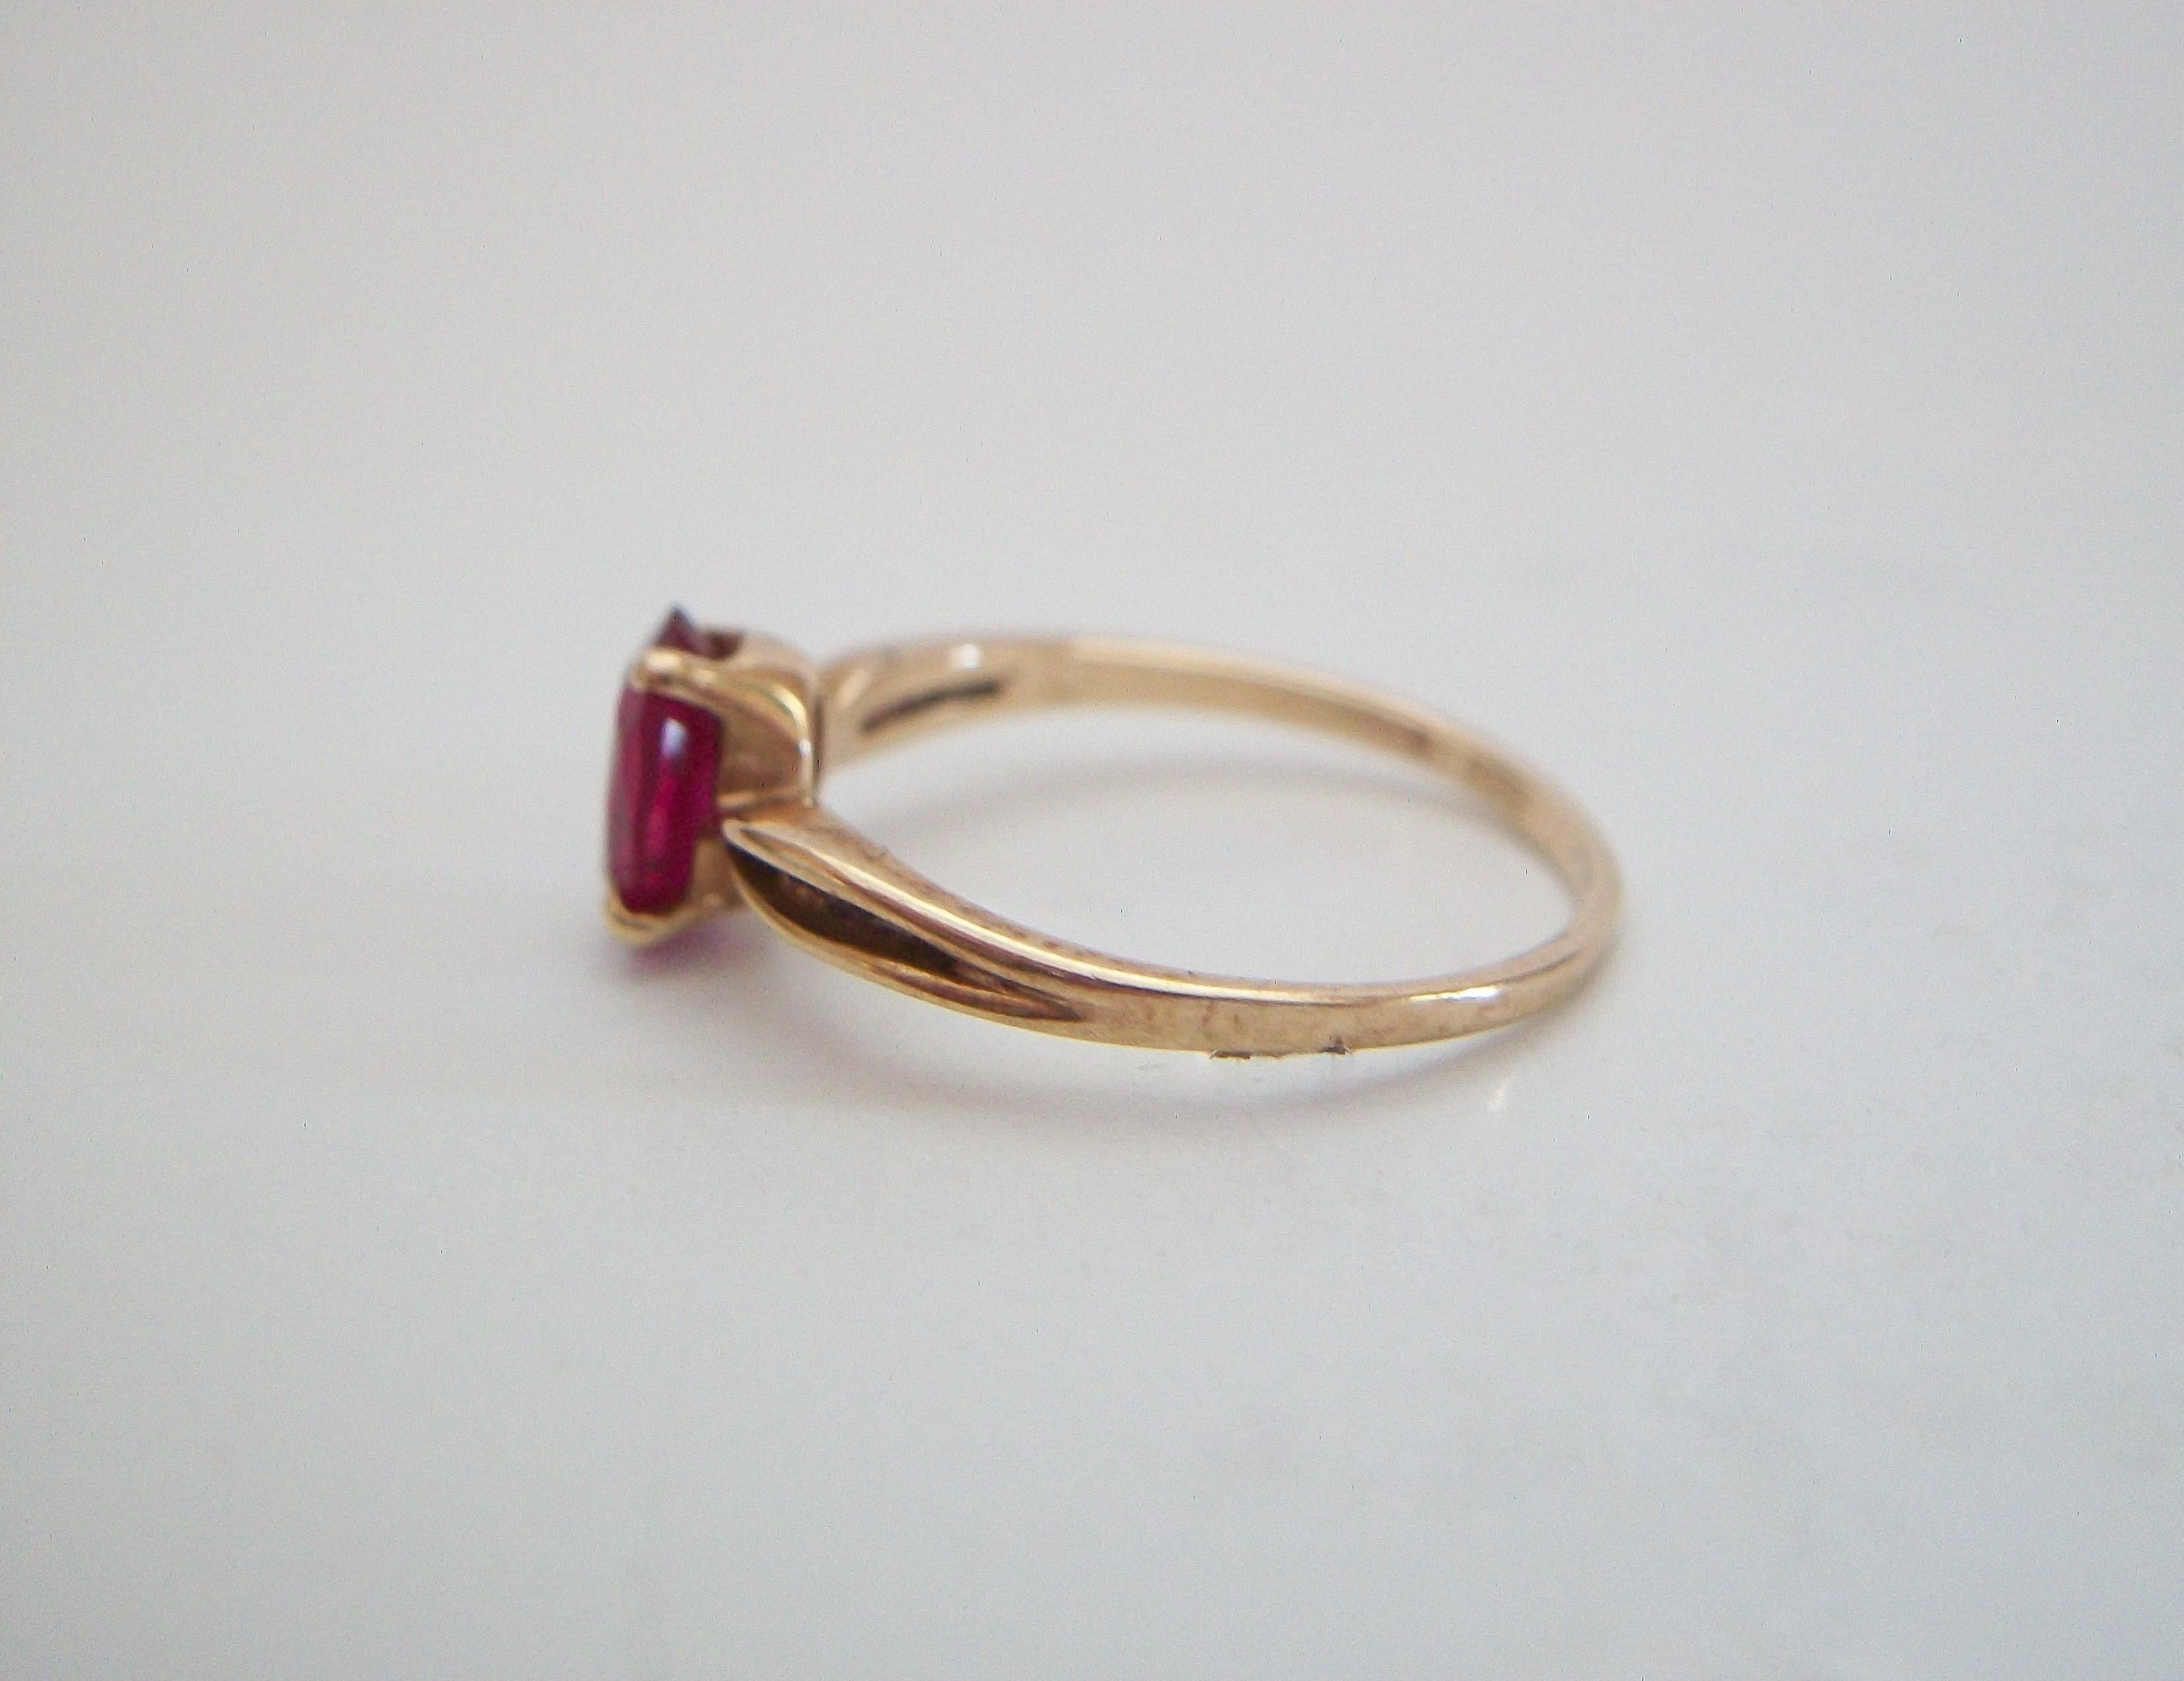 Women's Vintage Red Topaz & 10K Yellow Gold Ring - Size 5.5 - U.S.A. - Circa 1980's For Sale